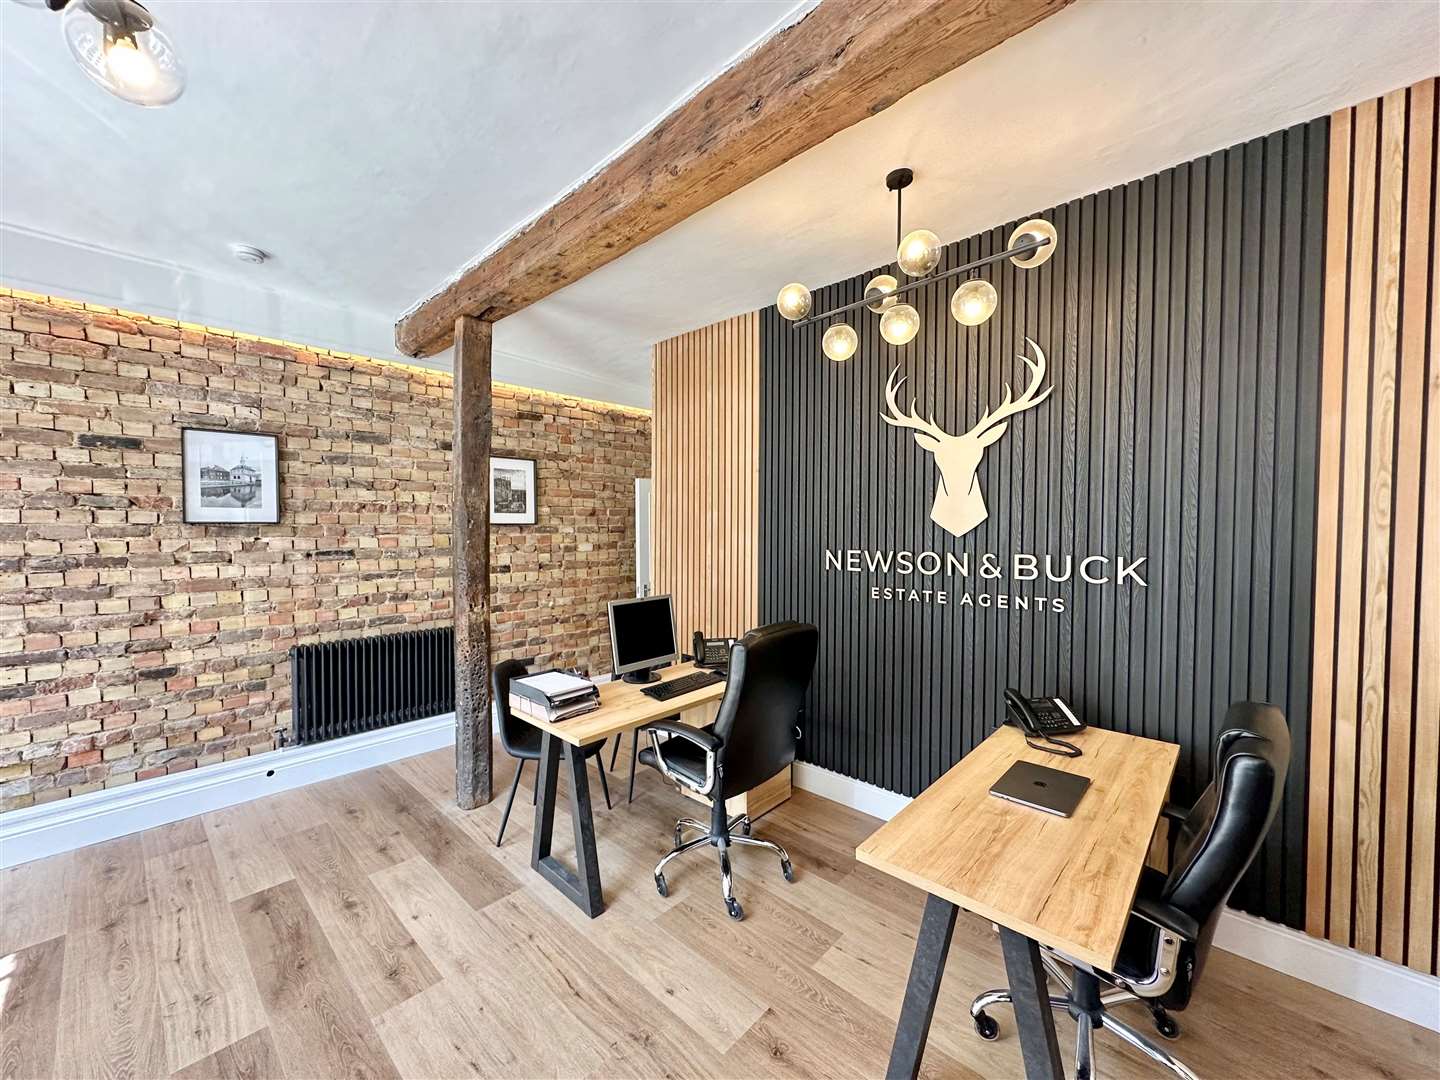 Dale Newson and James Buckman have renamed Millsopps to Newson and Buck Estate Agents